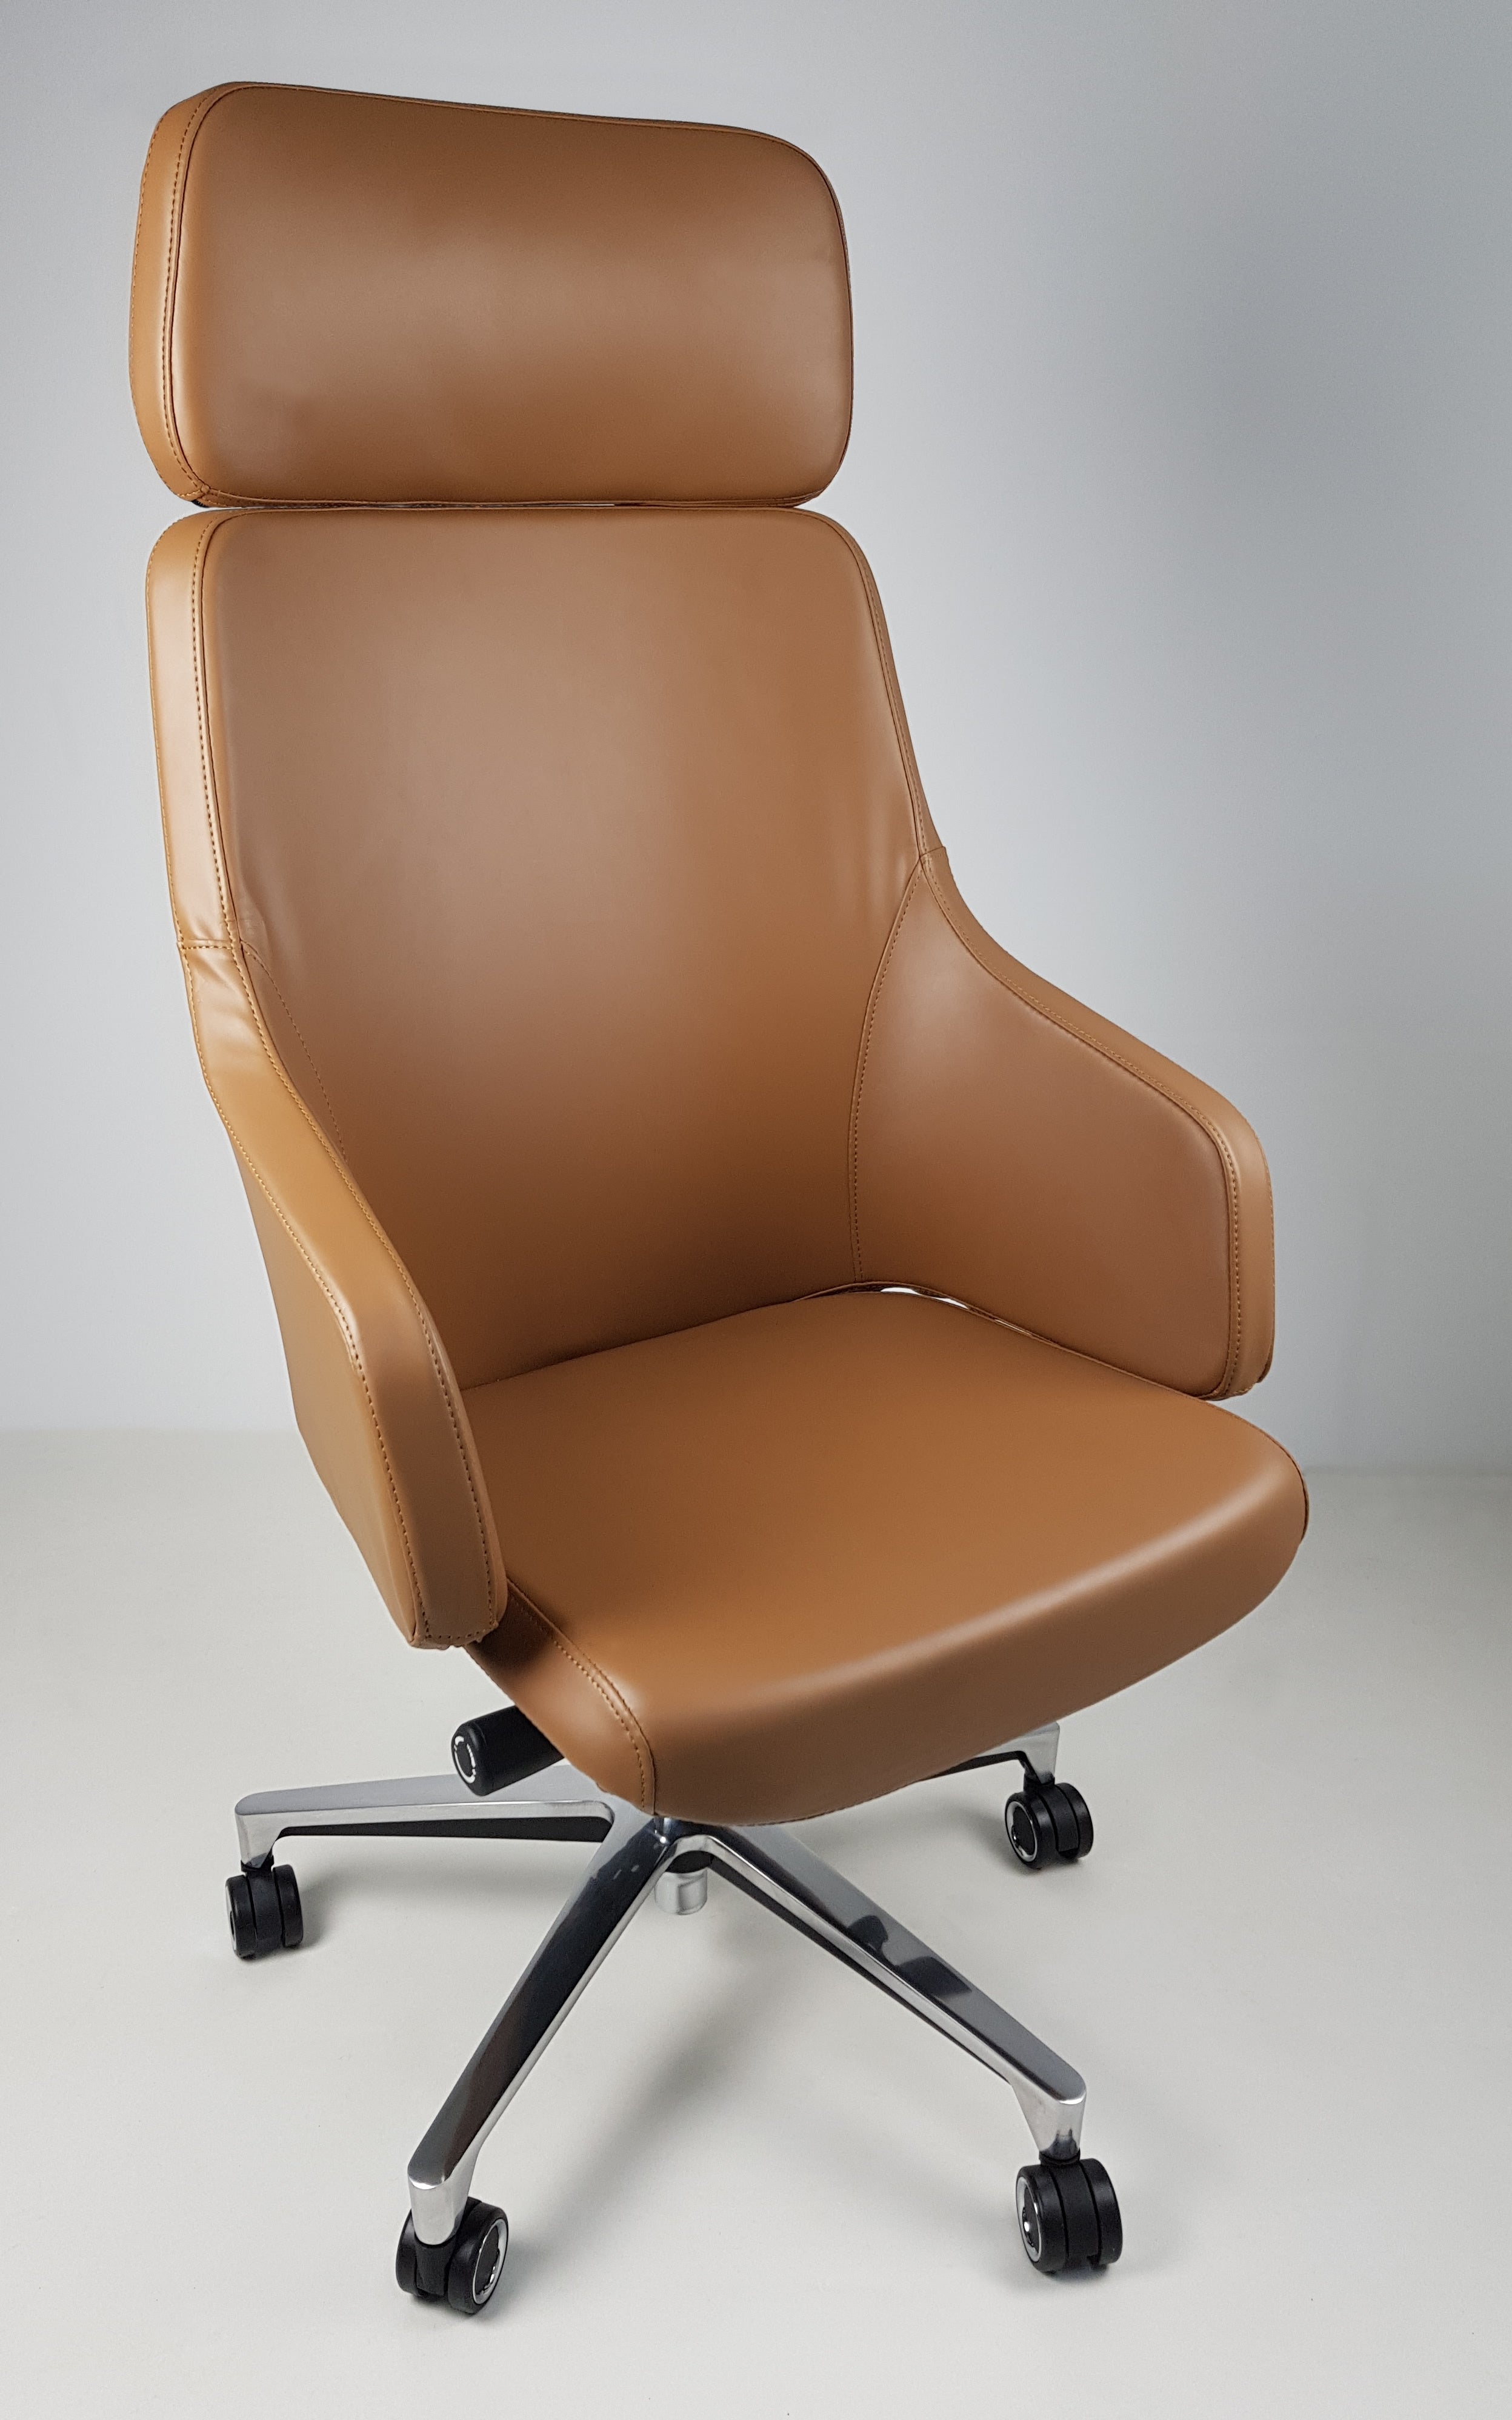 High Back Tan Leather Executive Office Chair with Seat Slide - CHA-1823A North Yorkshire